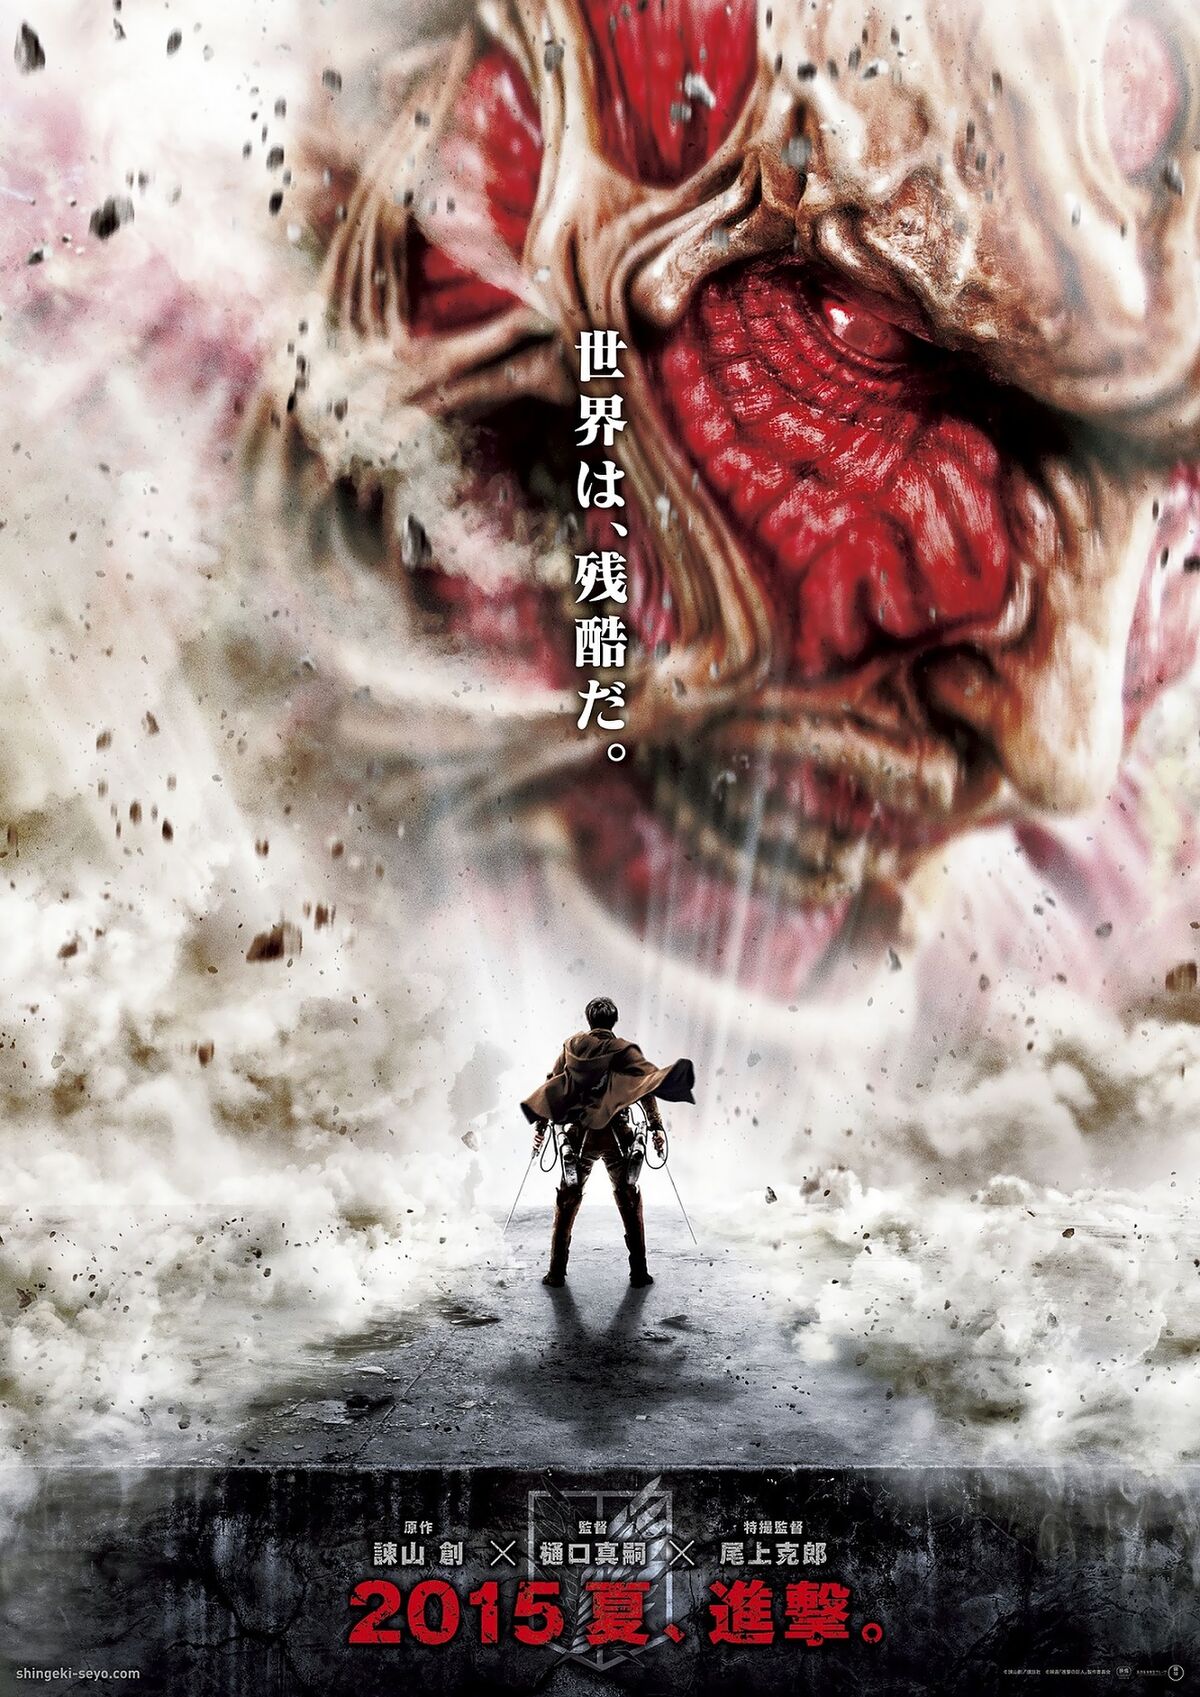 Attack on Titan' Series Finale: How to Stream It From Anywhere - CNET